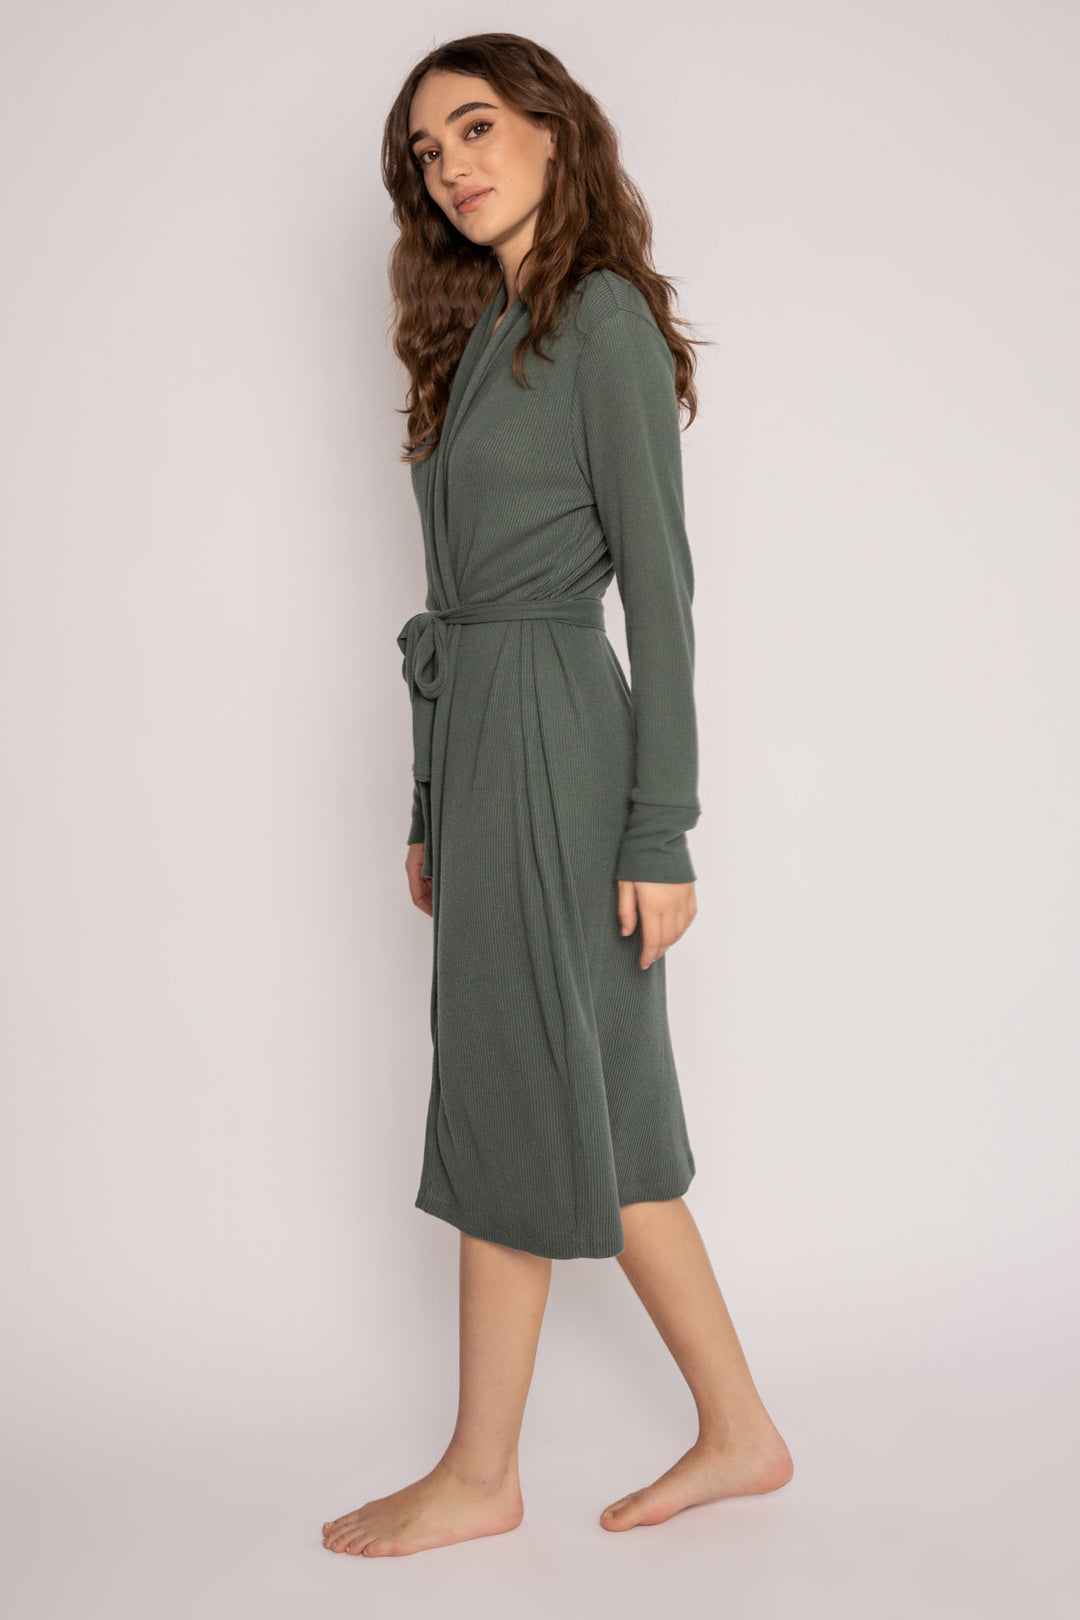 Green duster-robe with self-belt in 2x2 brushed peachy rib. Below the knee length with rib cuffs. (7199531204708)